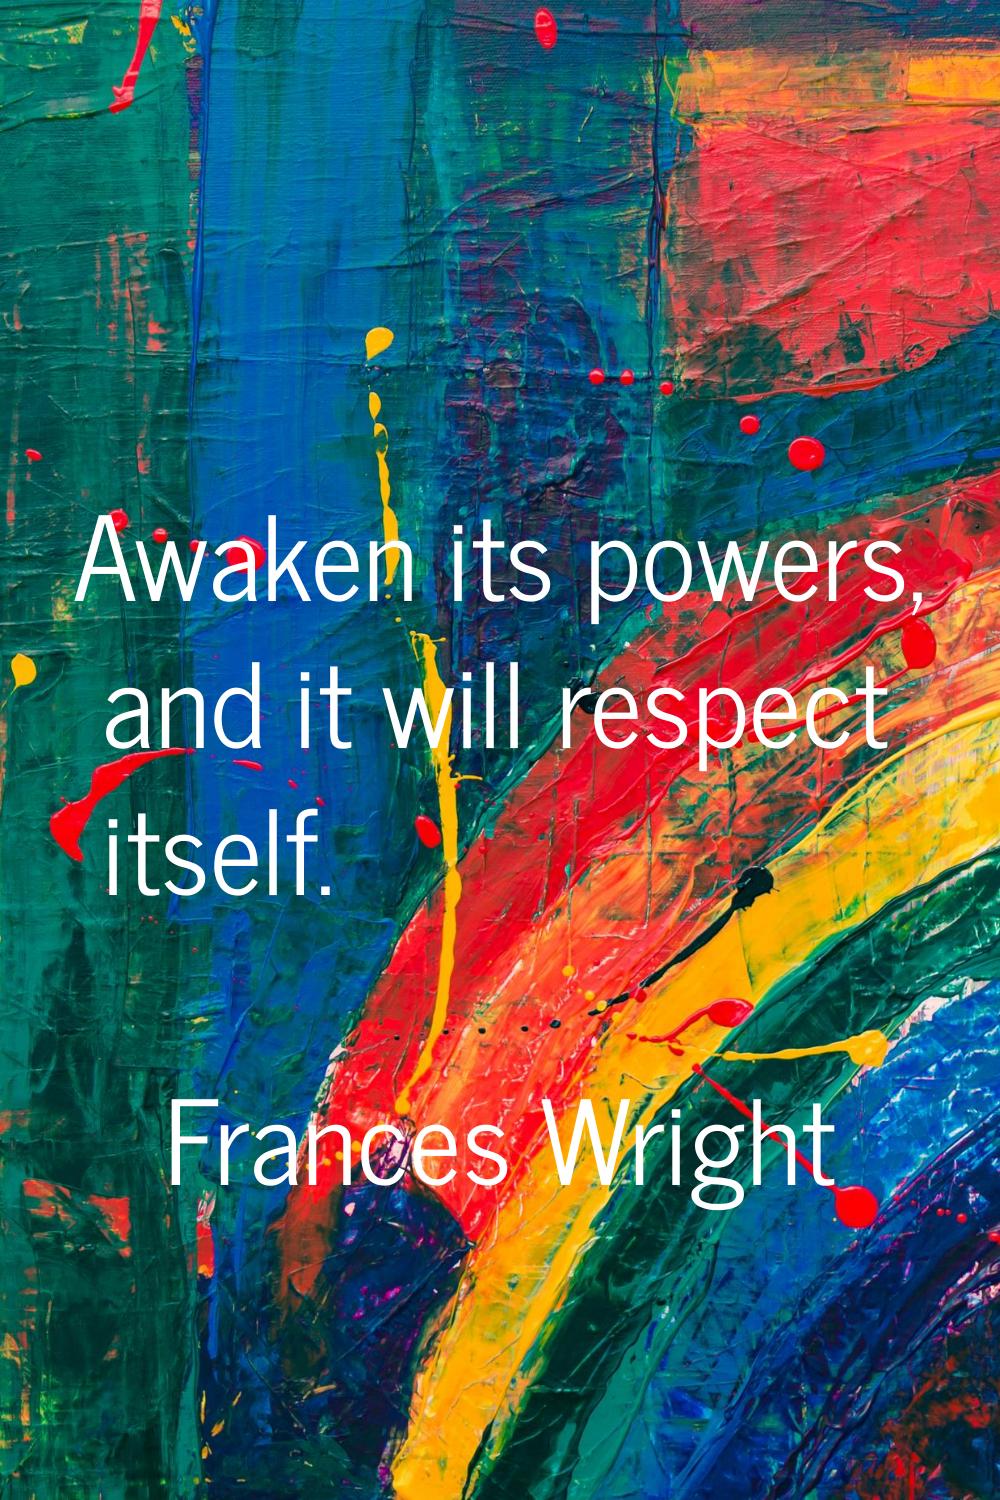 Awaken its powers, and it will respect itself.